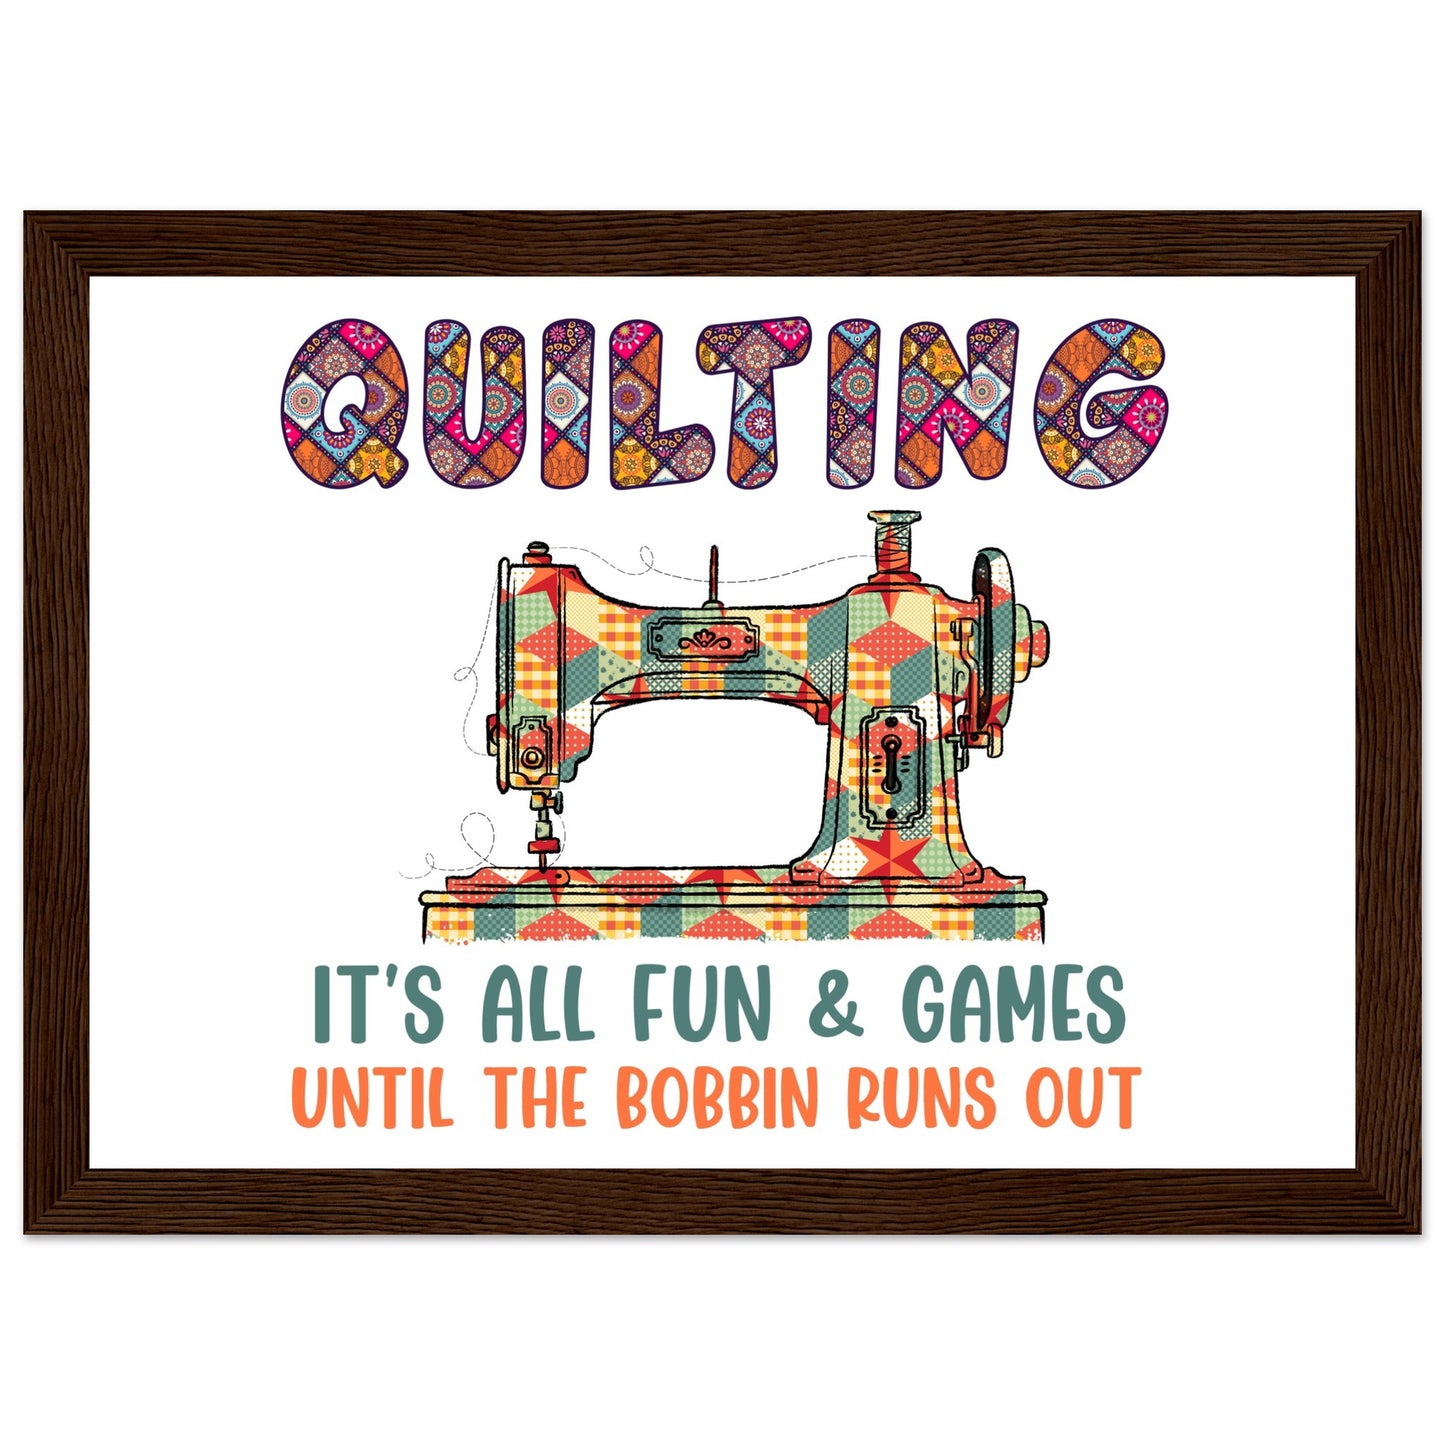 Quilting It's All Fun & Games Until the Bobbin Runs Out - Quilting Wall Art - Premium Matte Paper Wooden Framed Poster